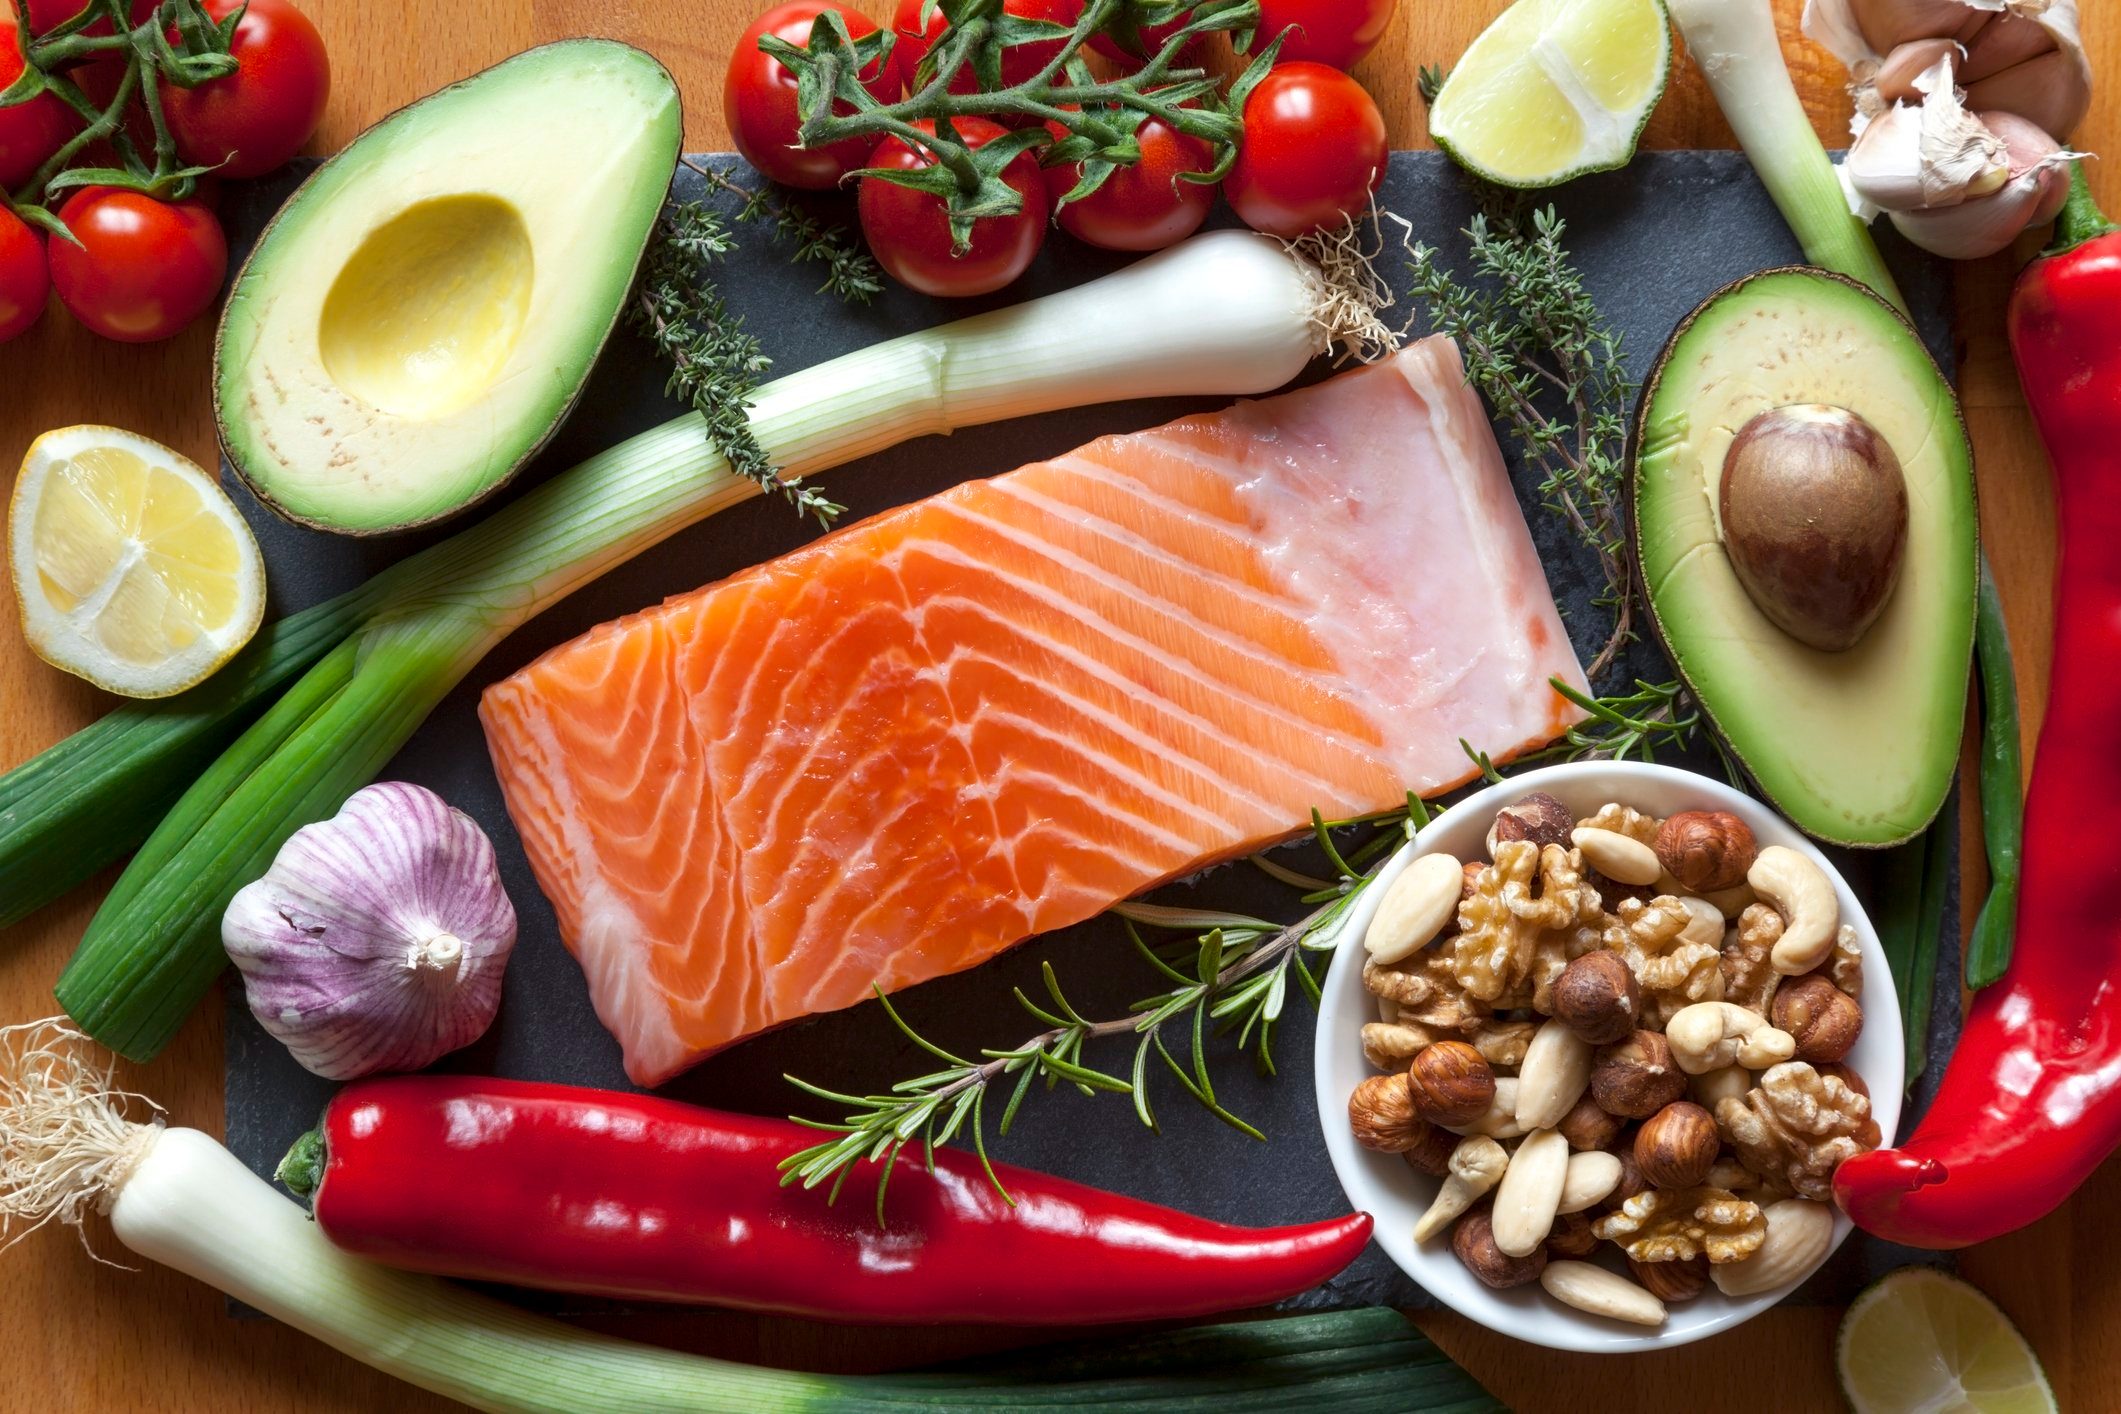 mediterranean diet | foods Items High in Healthy Omega-3 Fats.